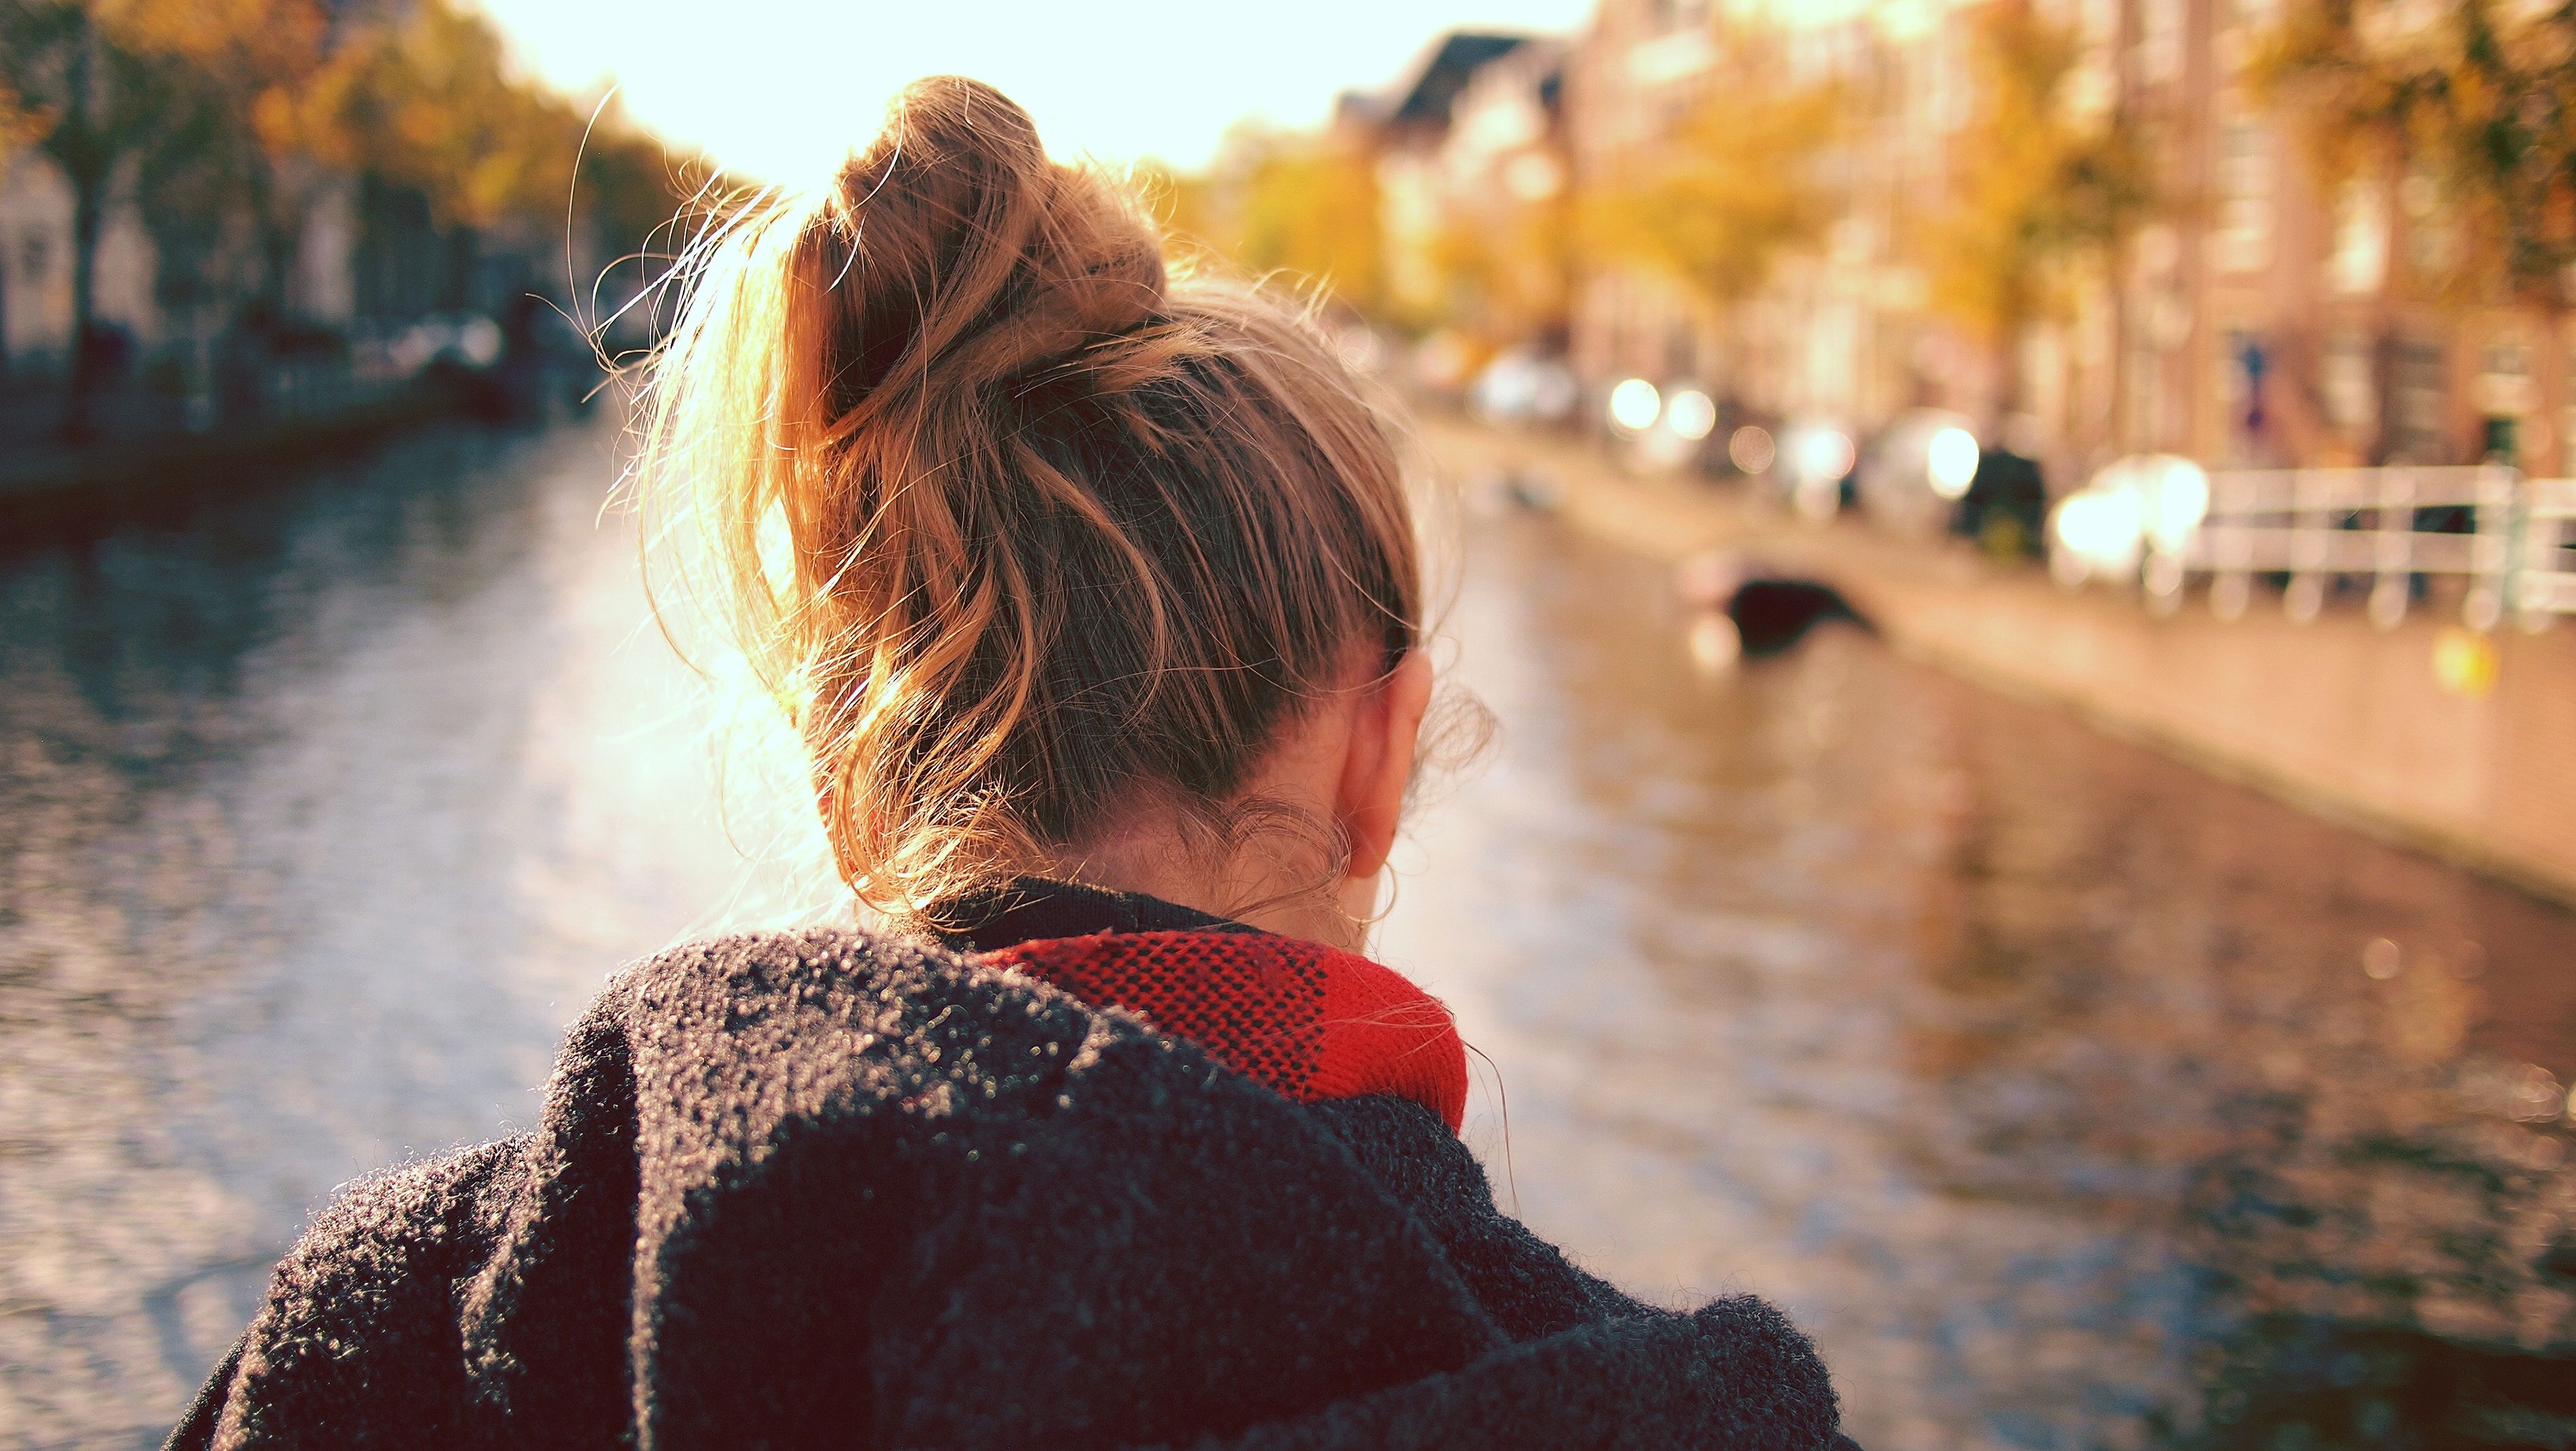 3800x2141 #person, #hair, #woman, #outlook, #city, #portrait, #river, #blonde, #holiday, #girl, #tour, #lifestyle, #sunny, #hoodie, #lady, #messy bun, #female, #city trip, #Public domain image, #young, #water